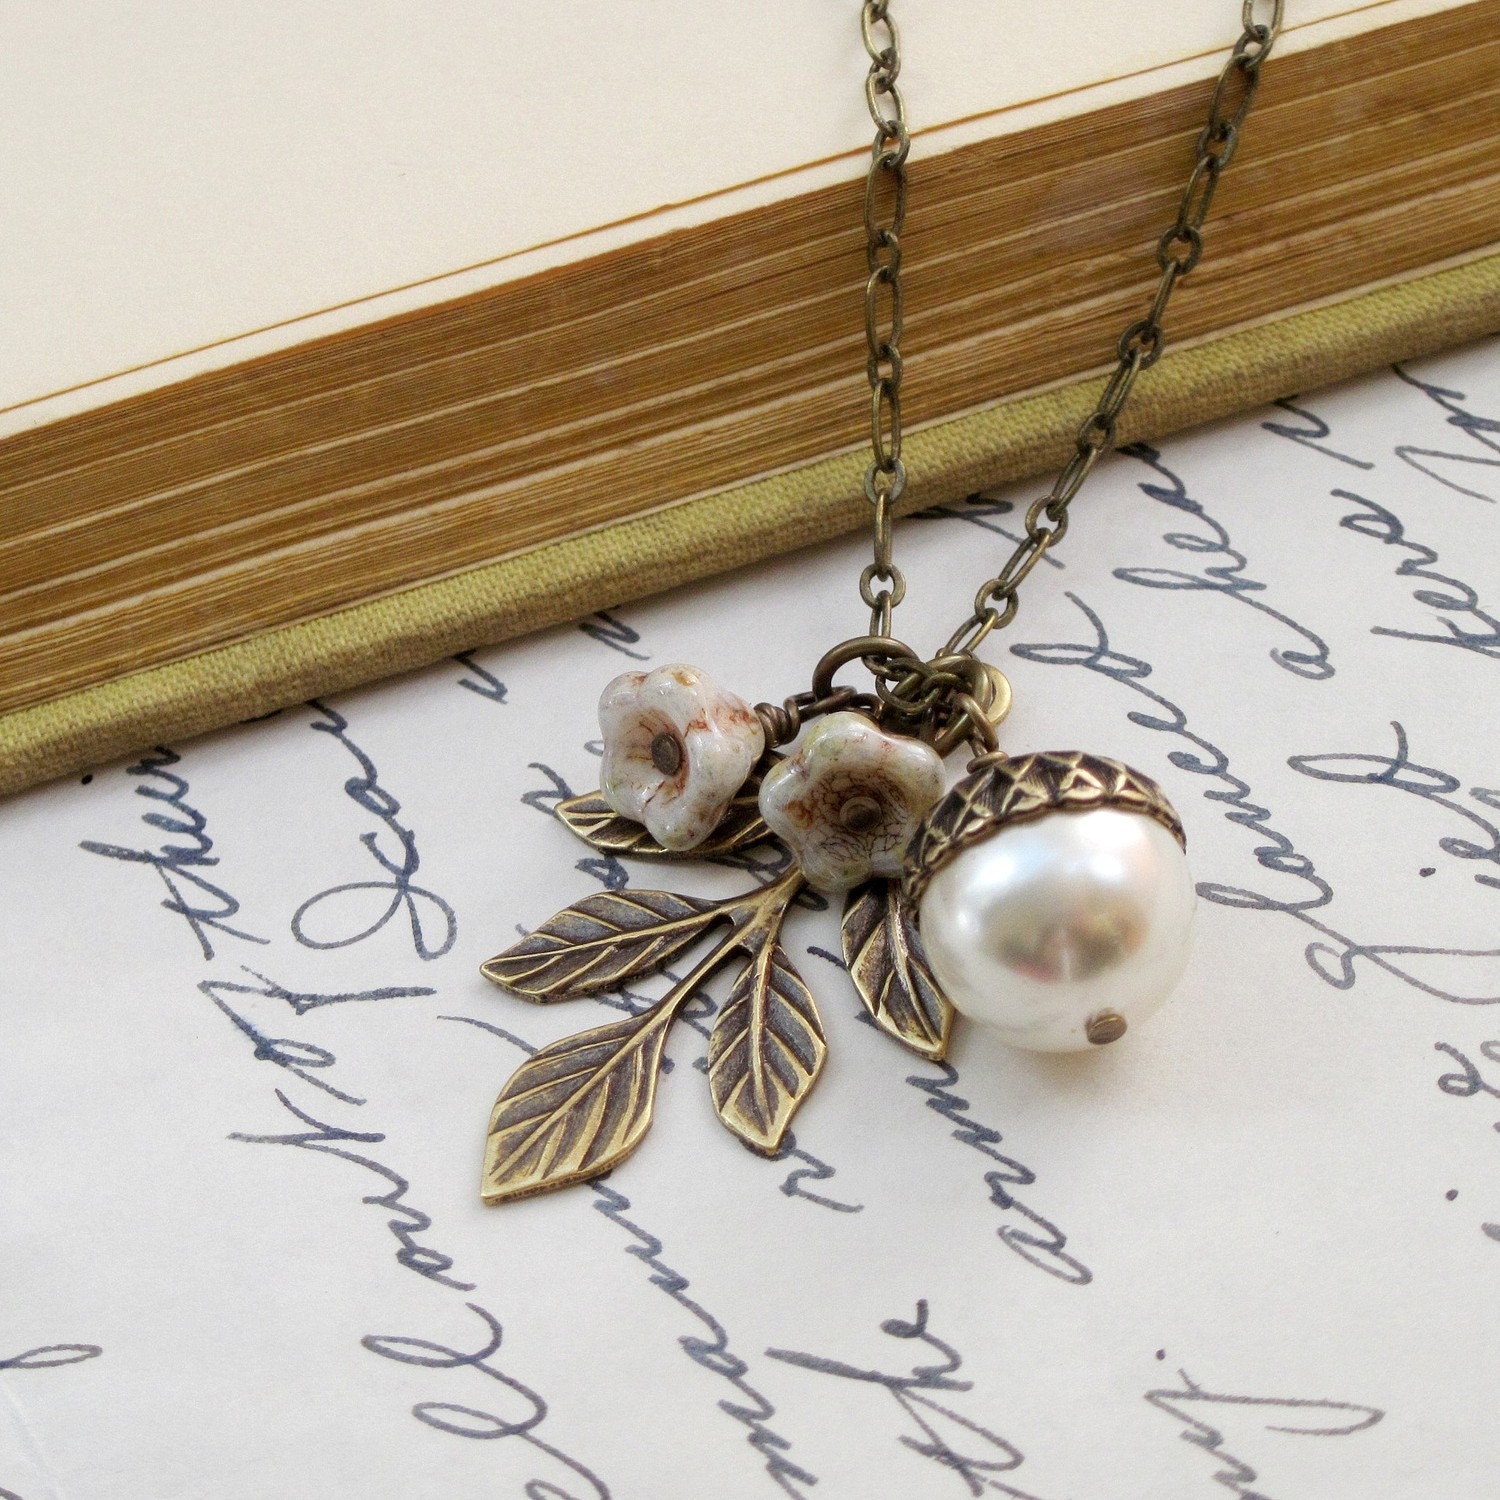 Necklace. Jewelry, Acorn, Pearl, Leaf, Leaves, Green, Cream, Glass, Flowers, Holiday, Winter. Nutcracker. Vintage inspired jewelry by Lauren Blythe Designs Jewelry on Etsy.